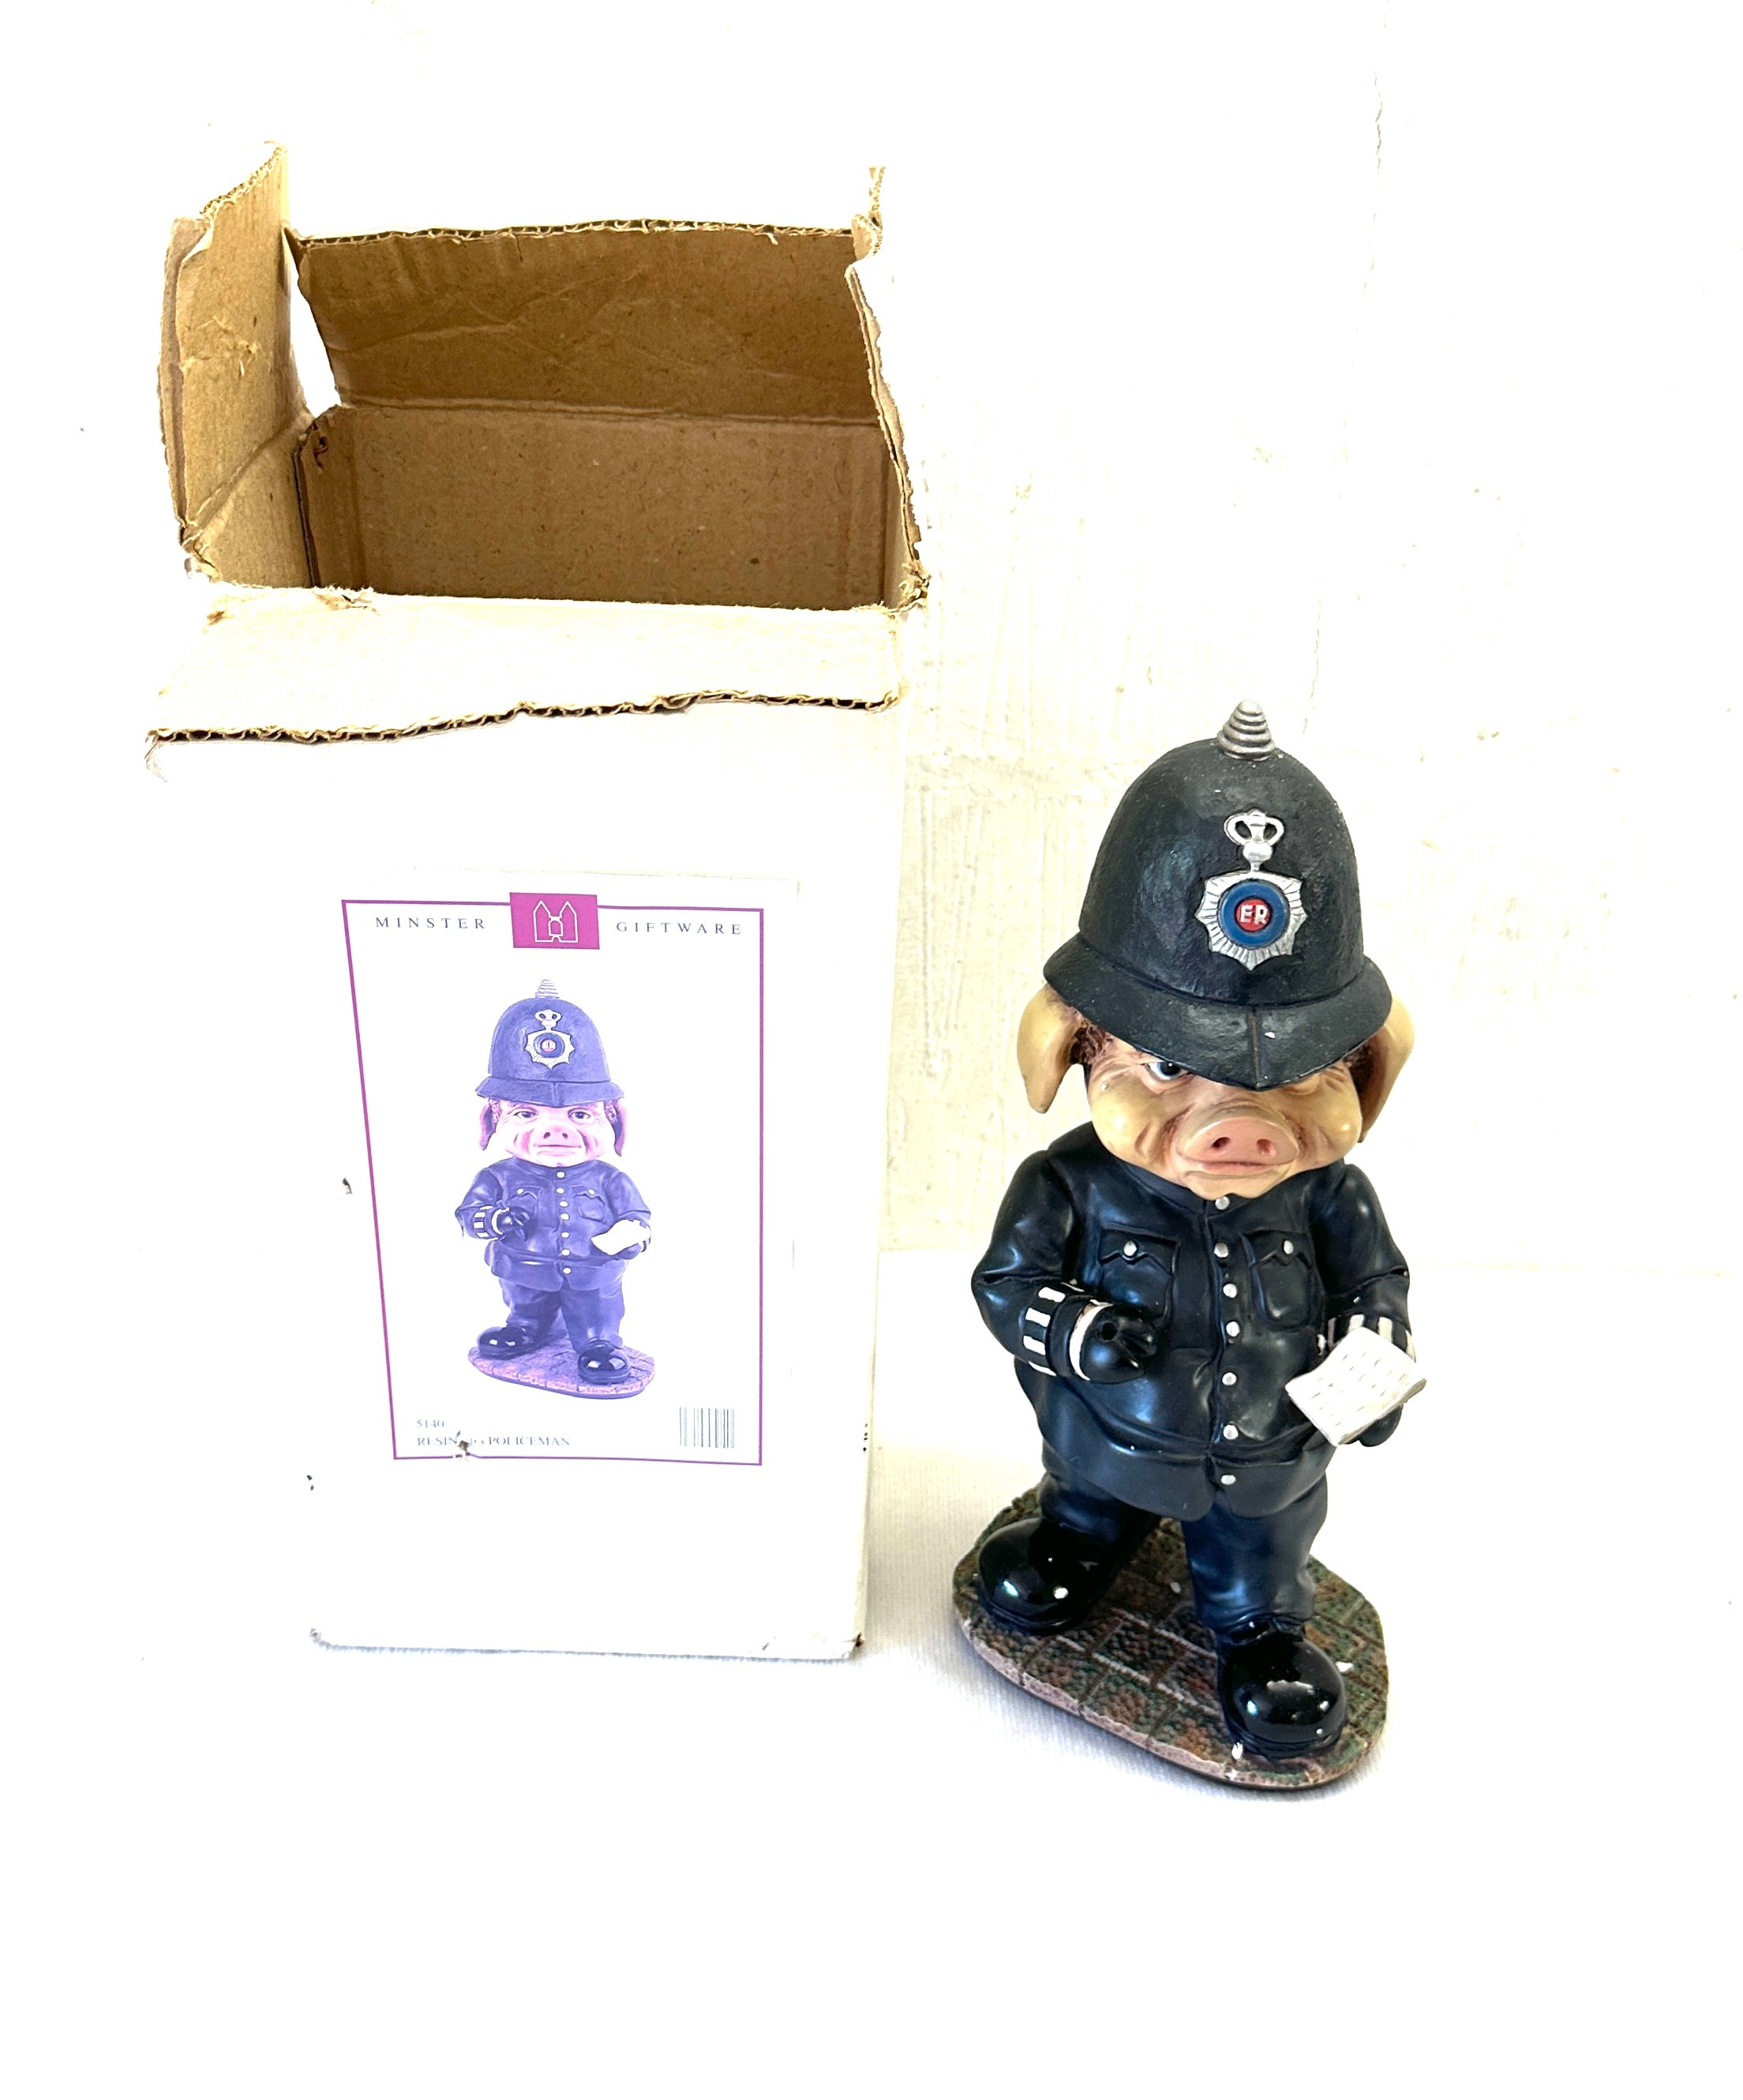 Vintage resin pig policeman figure measures approx 13 inches tall